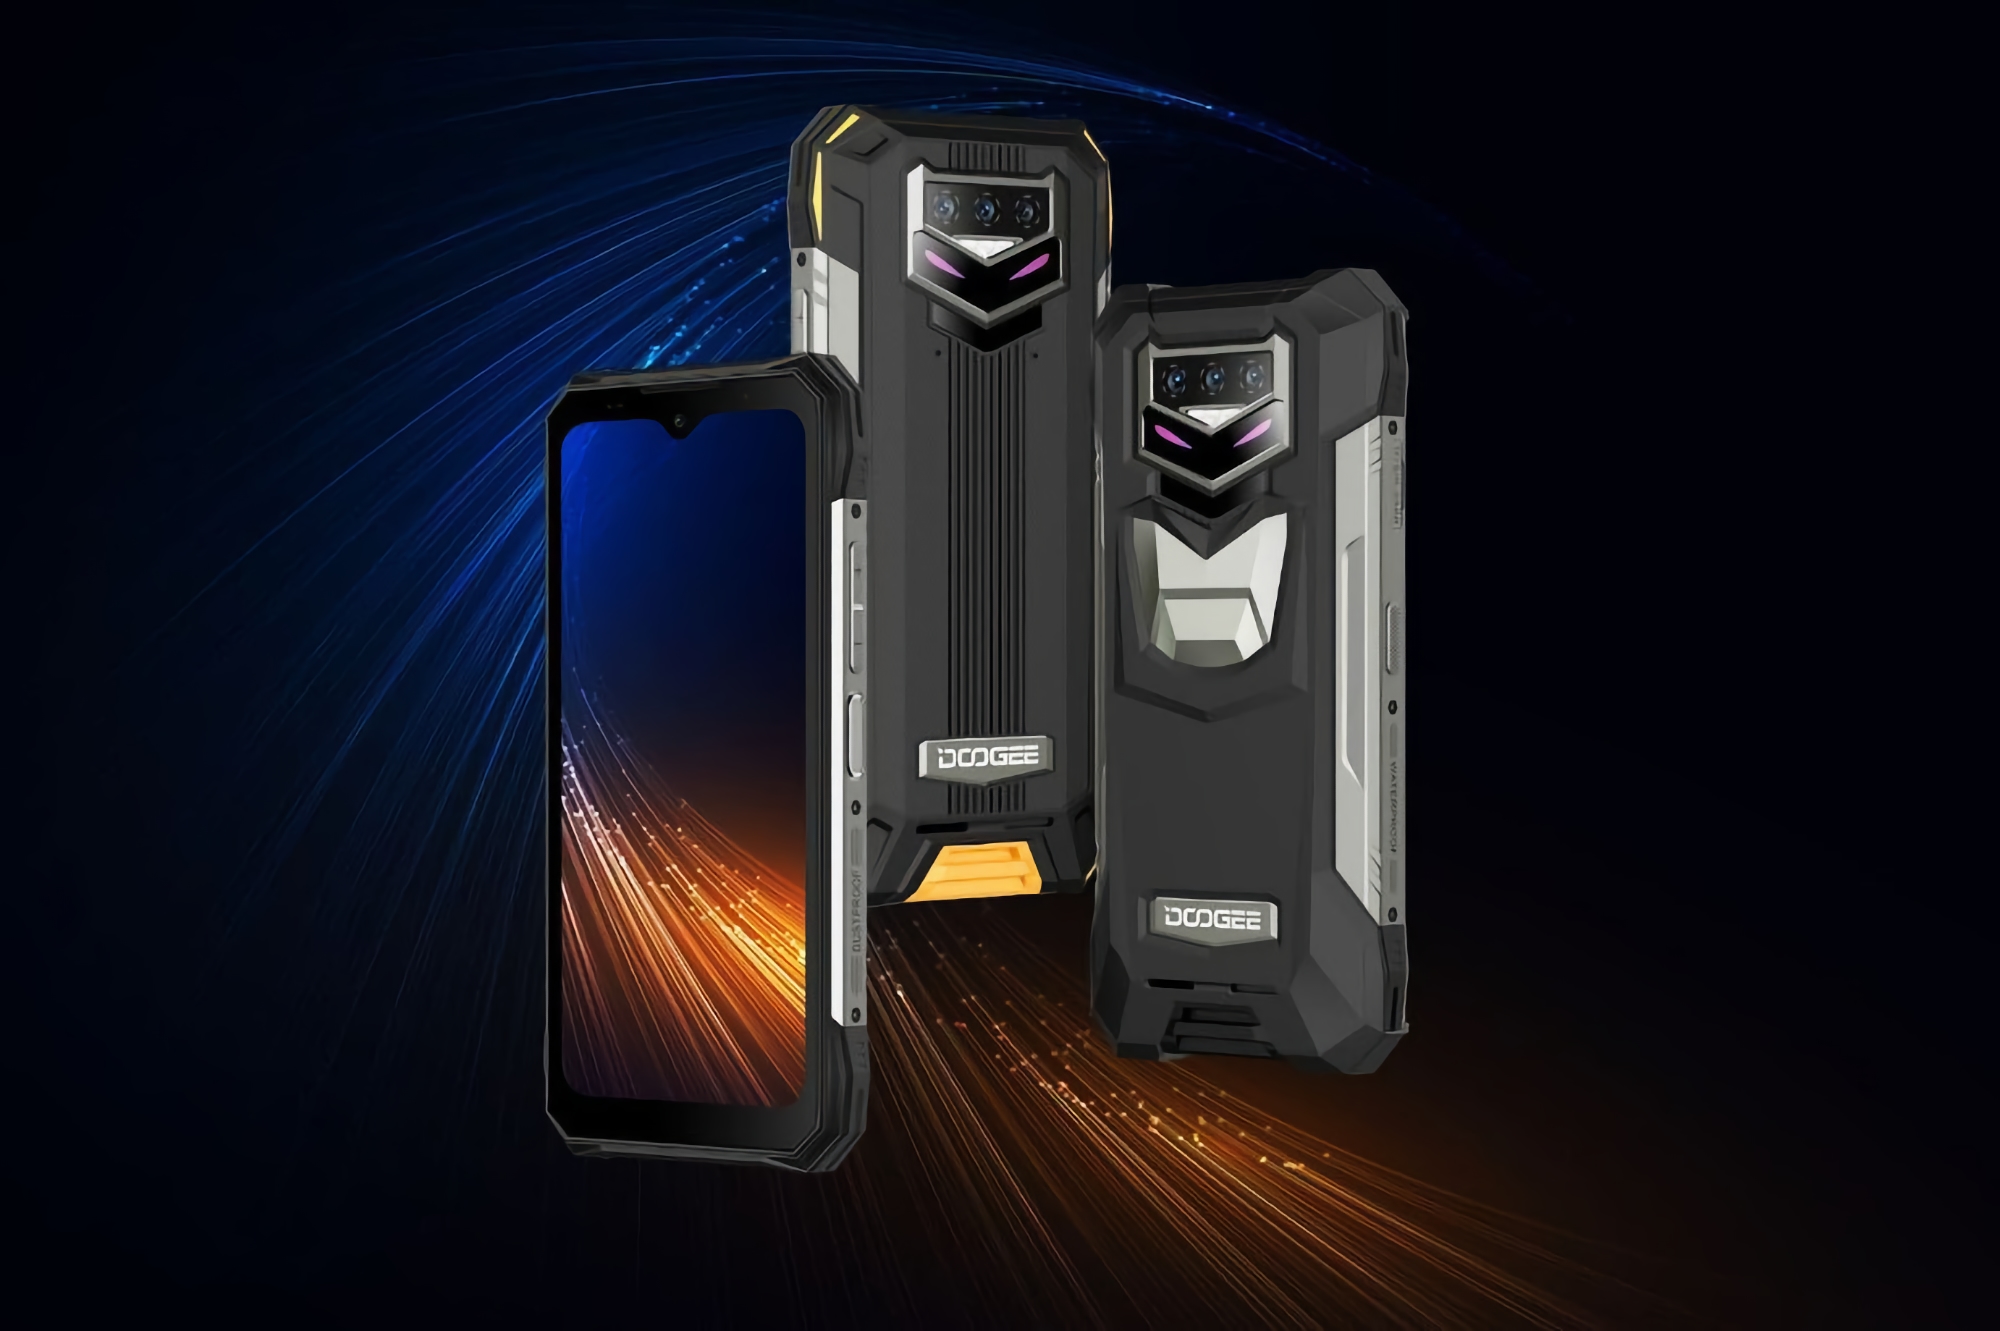 Shockproof smartphone DOOGEE S89 Pro with a battery of 12000 mAh and a night vision camera - on AliExpress with promo price